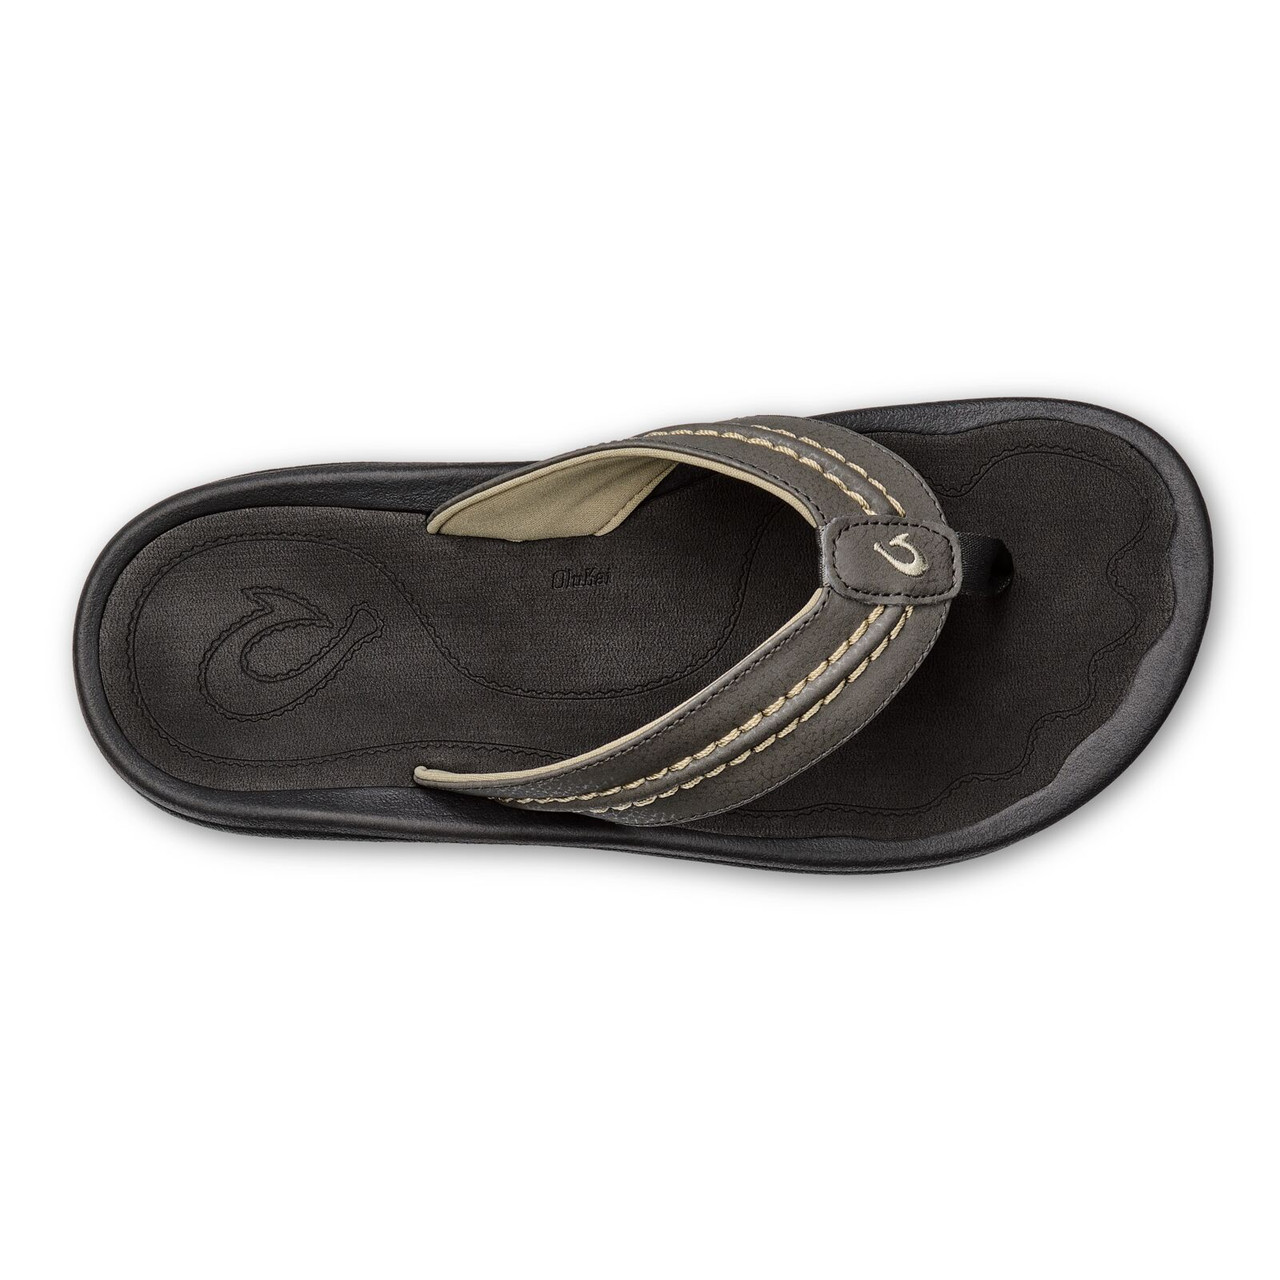 IRSOE Men's Beach Sandals Orthotic Arch Support India | Ubuy